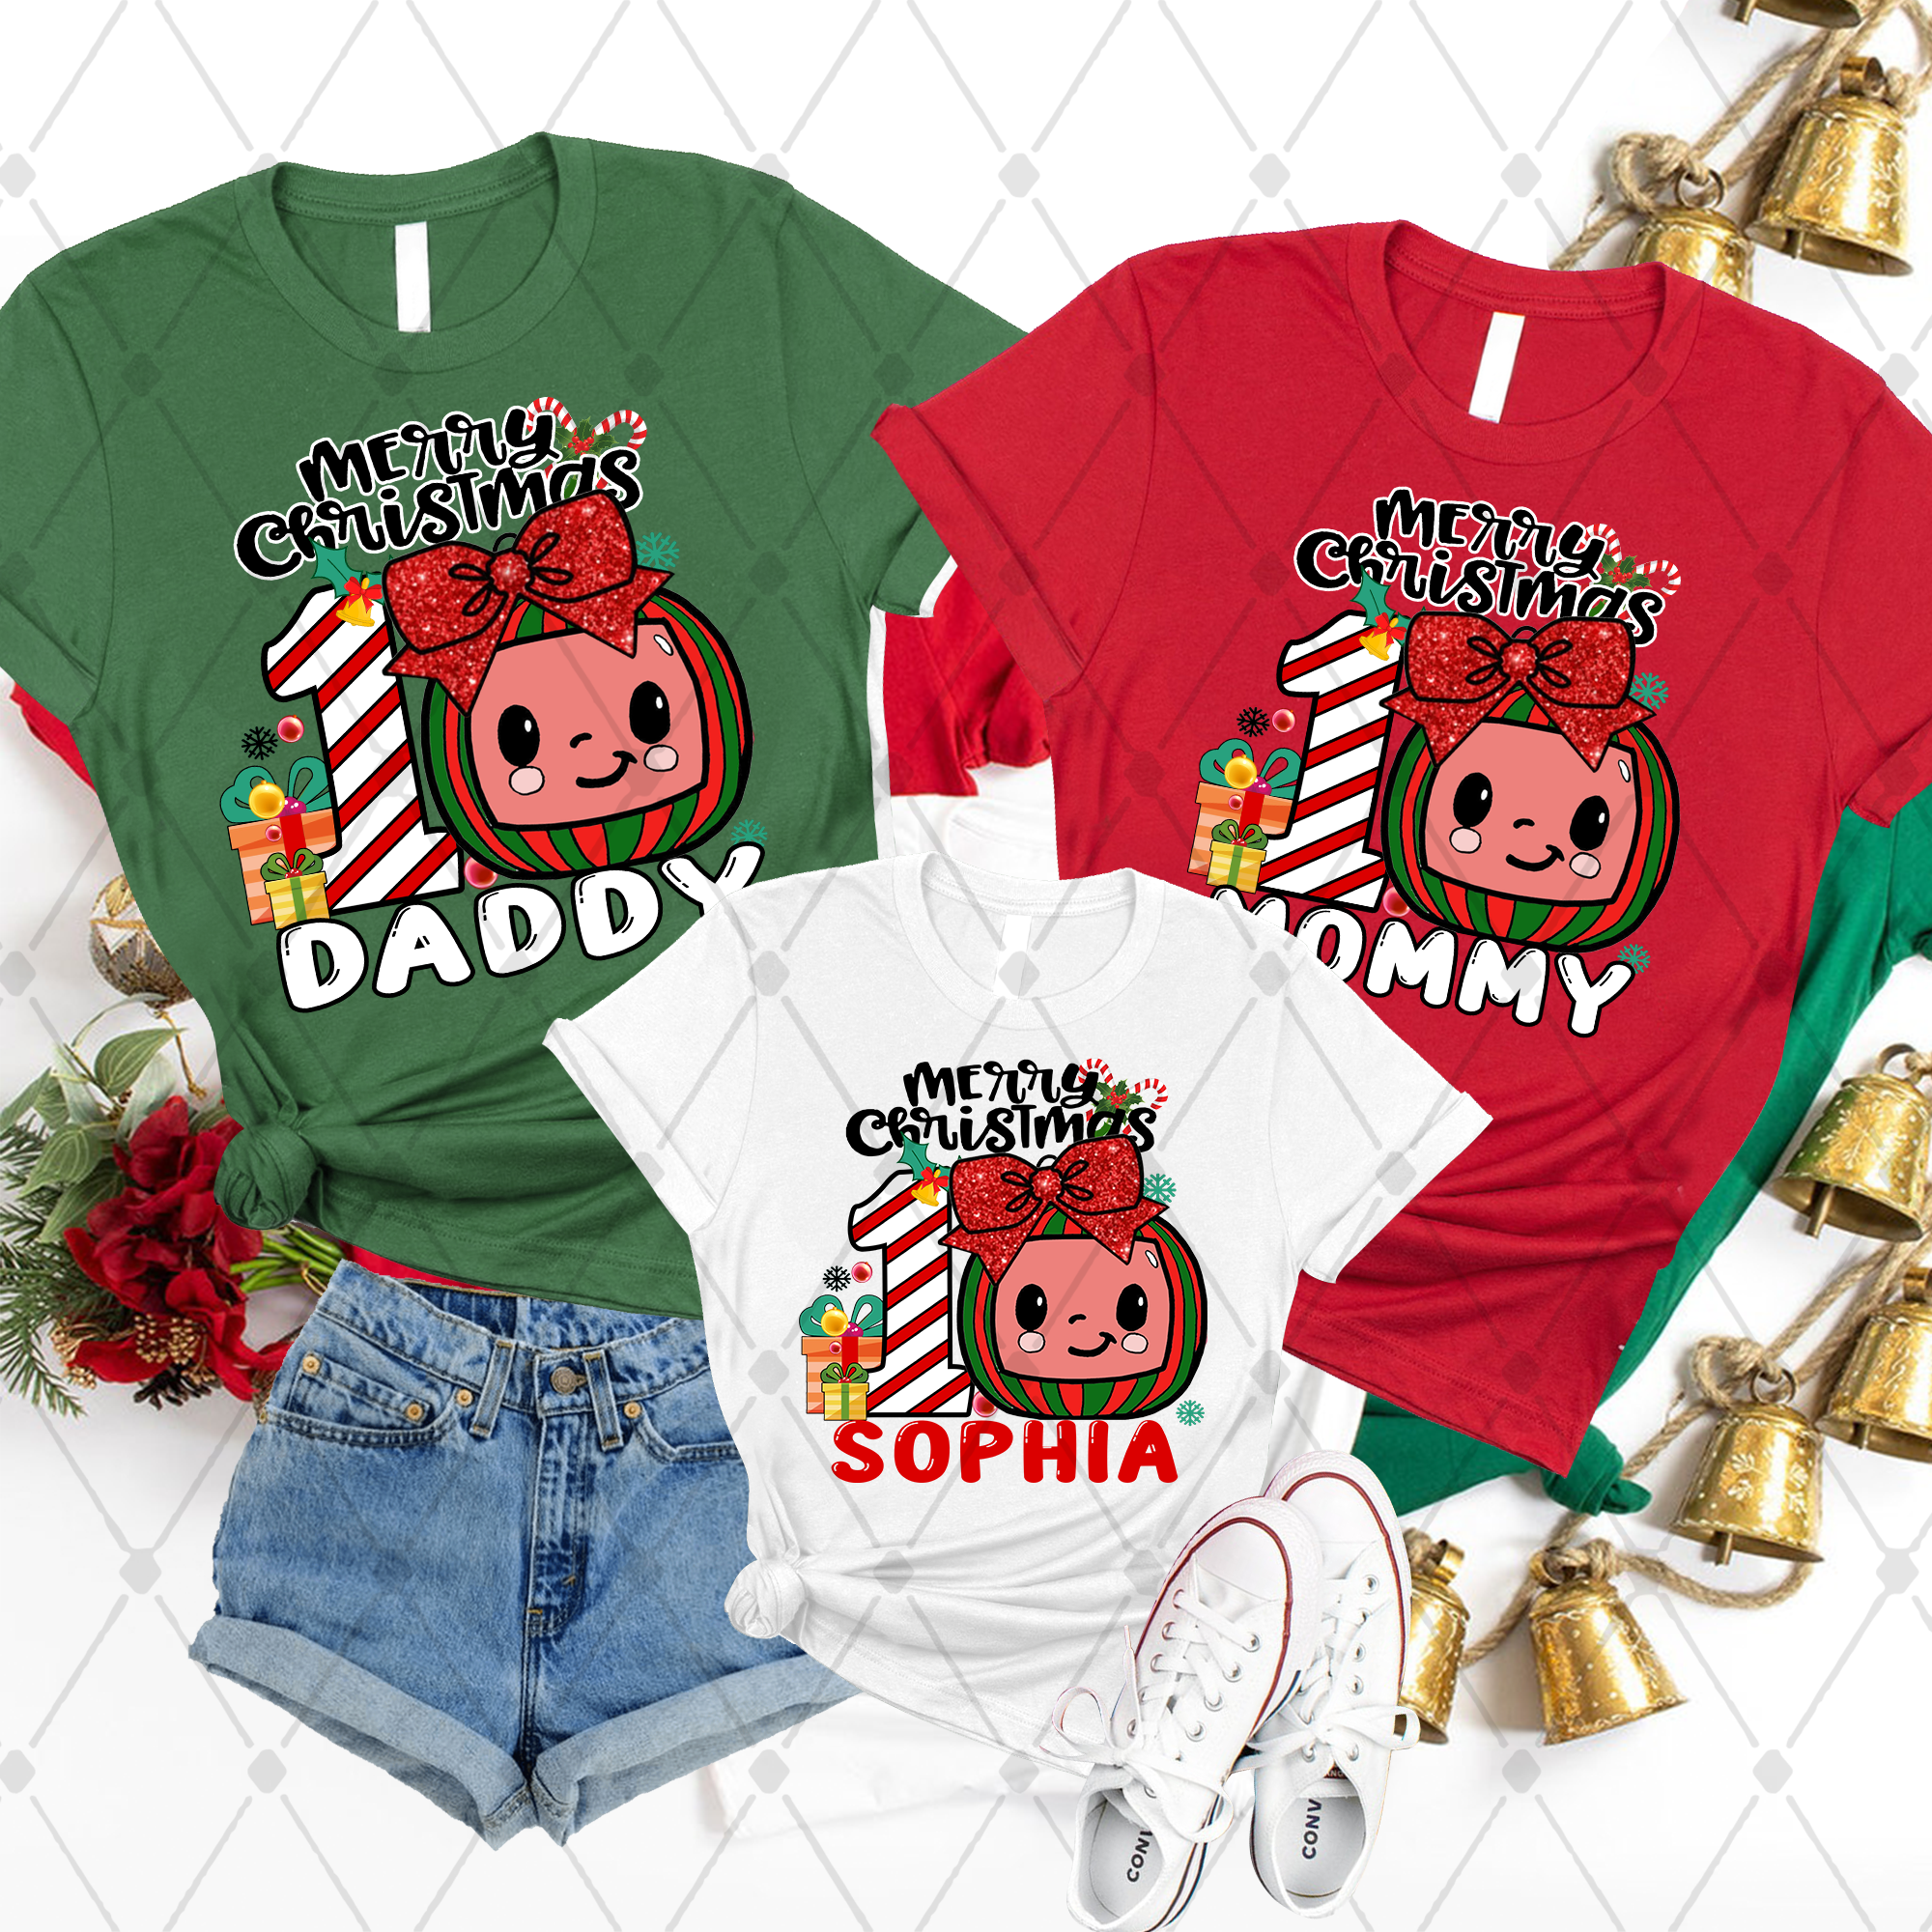 Cocomelon Merry Christmas Candy Cane Girl shirt, Christmas Candy Cane Shirt, Cocomelon Family Christmas Shirt, Cocomelon  Birthday Girl Shirt